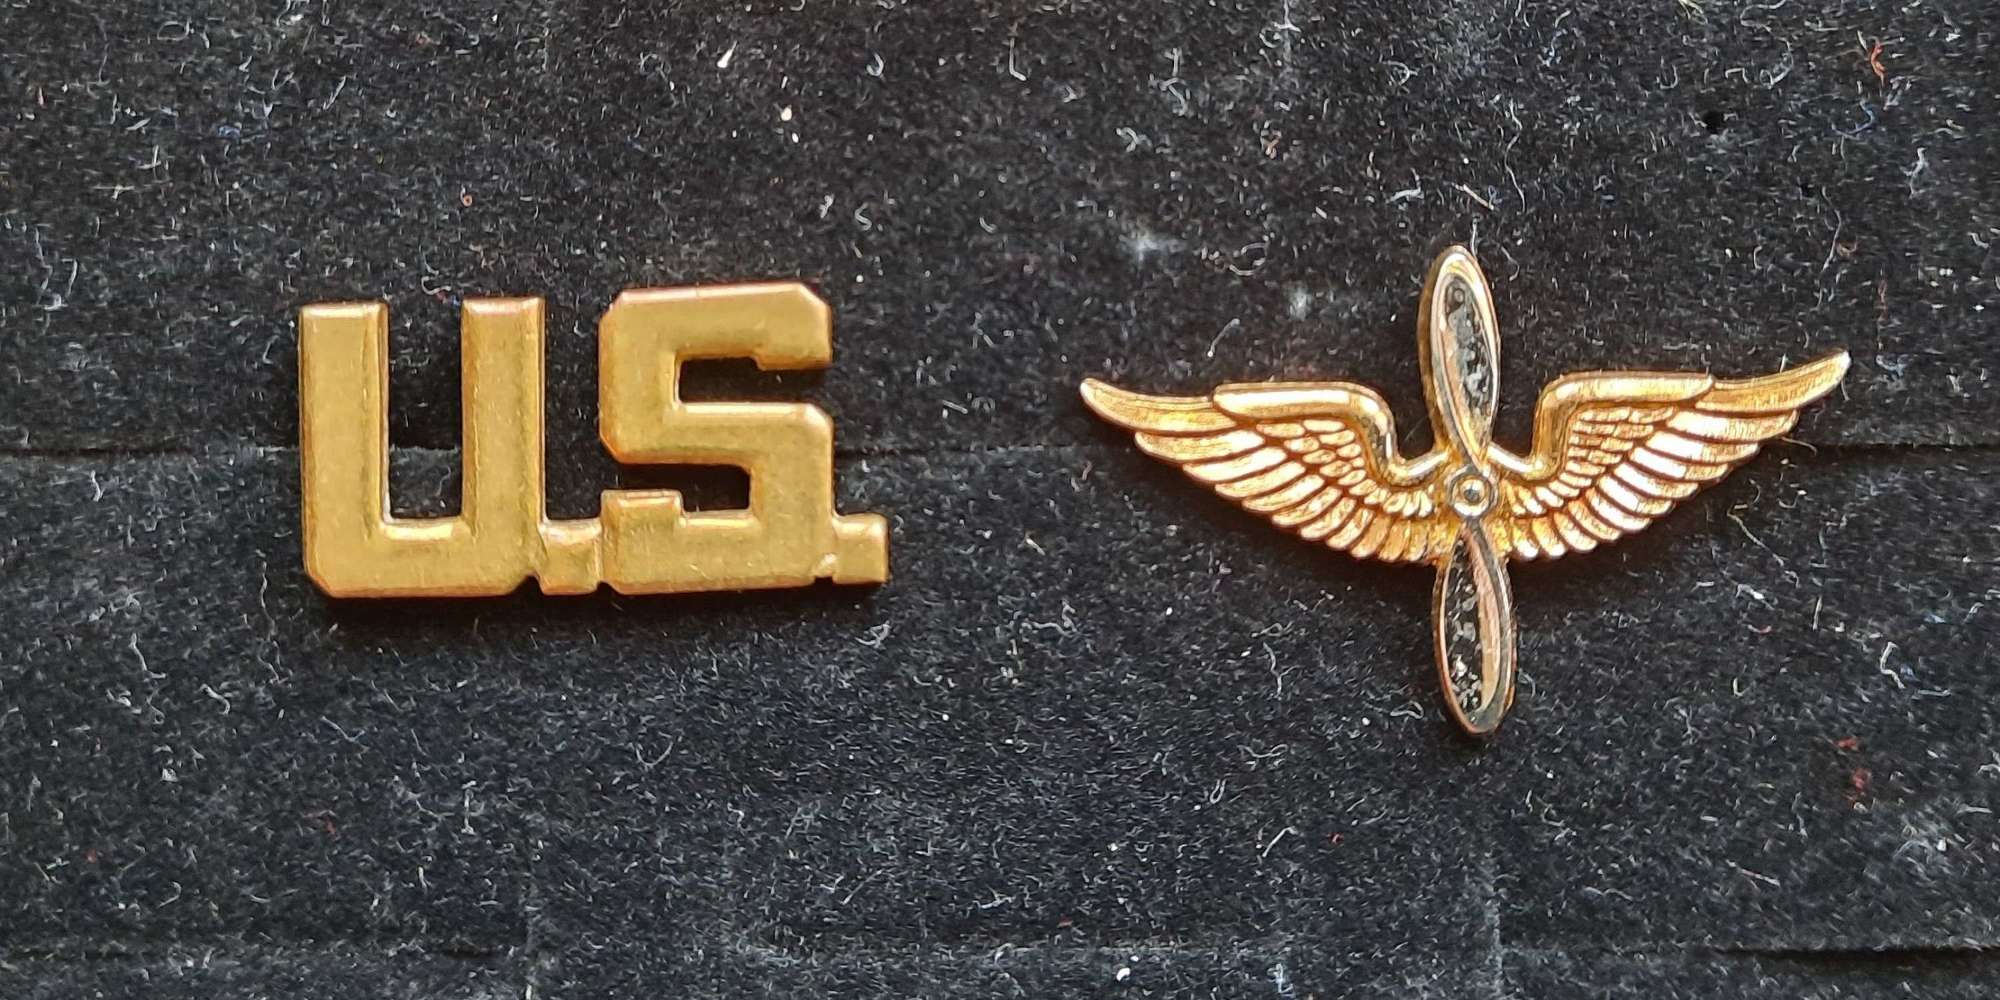 USAAF Officer's Shirt Collar Devices